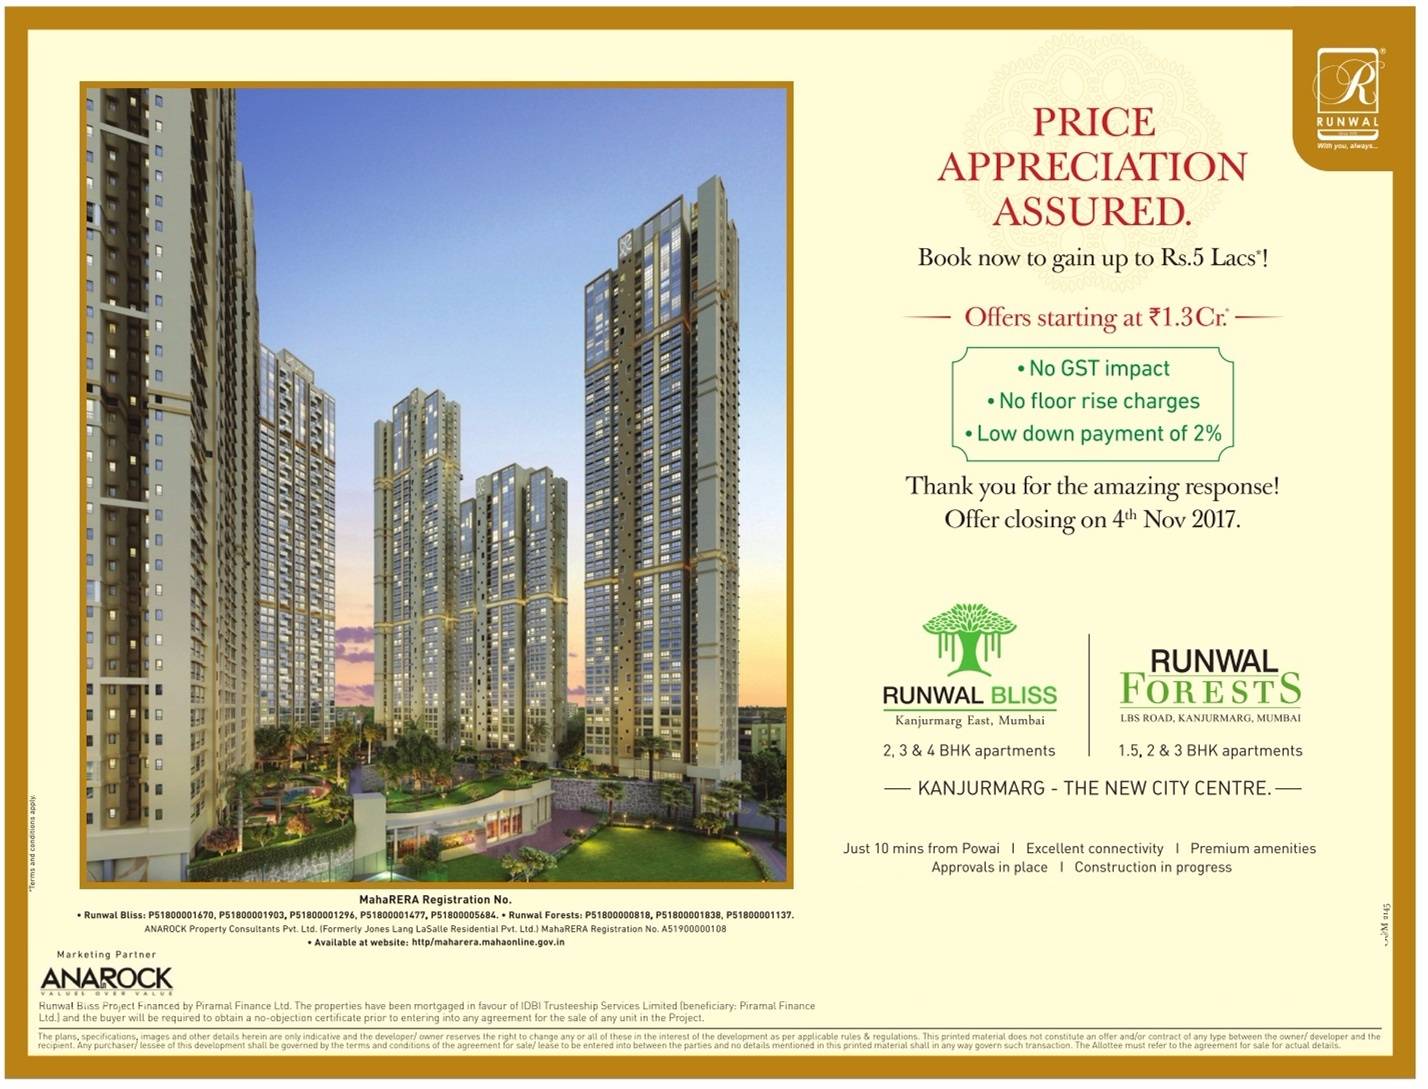 Price appreciation assured, book now and gain up to Rs. 5 Lacs at Runwal Projects in Mumbai Update